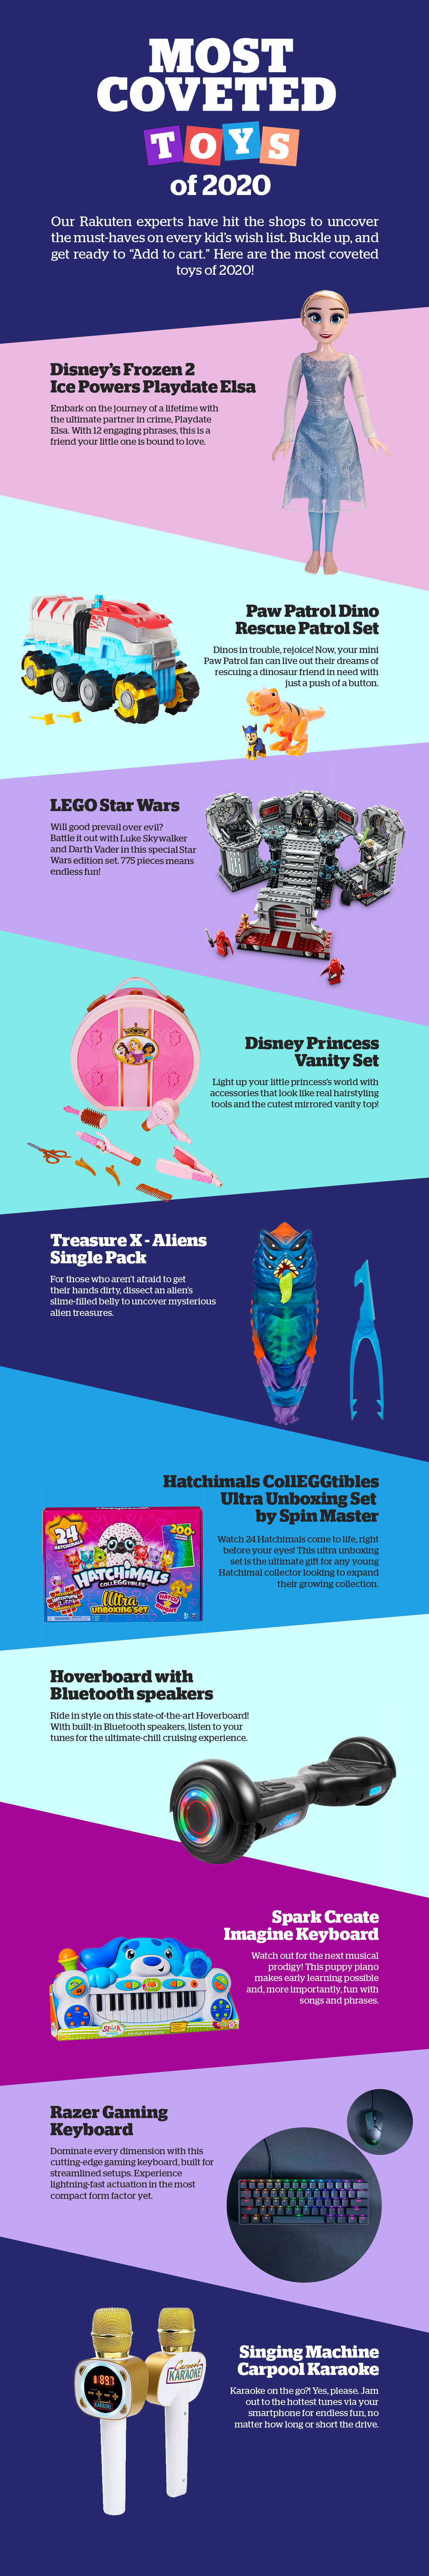 Most Coveted Toys infographic